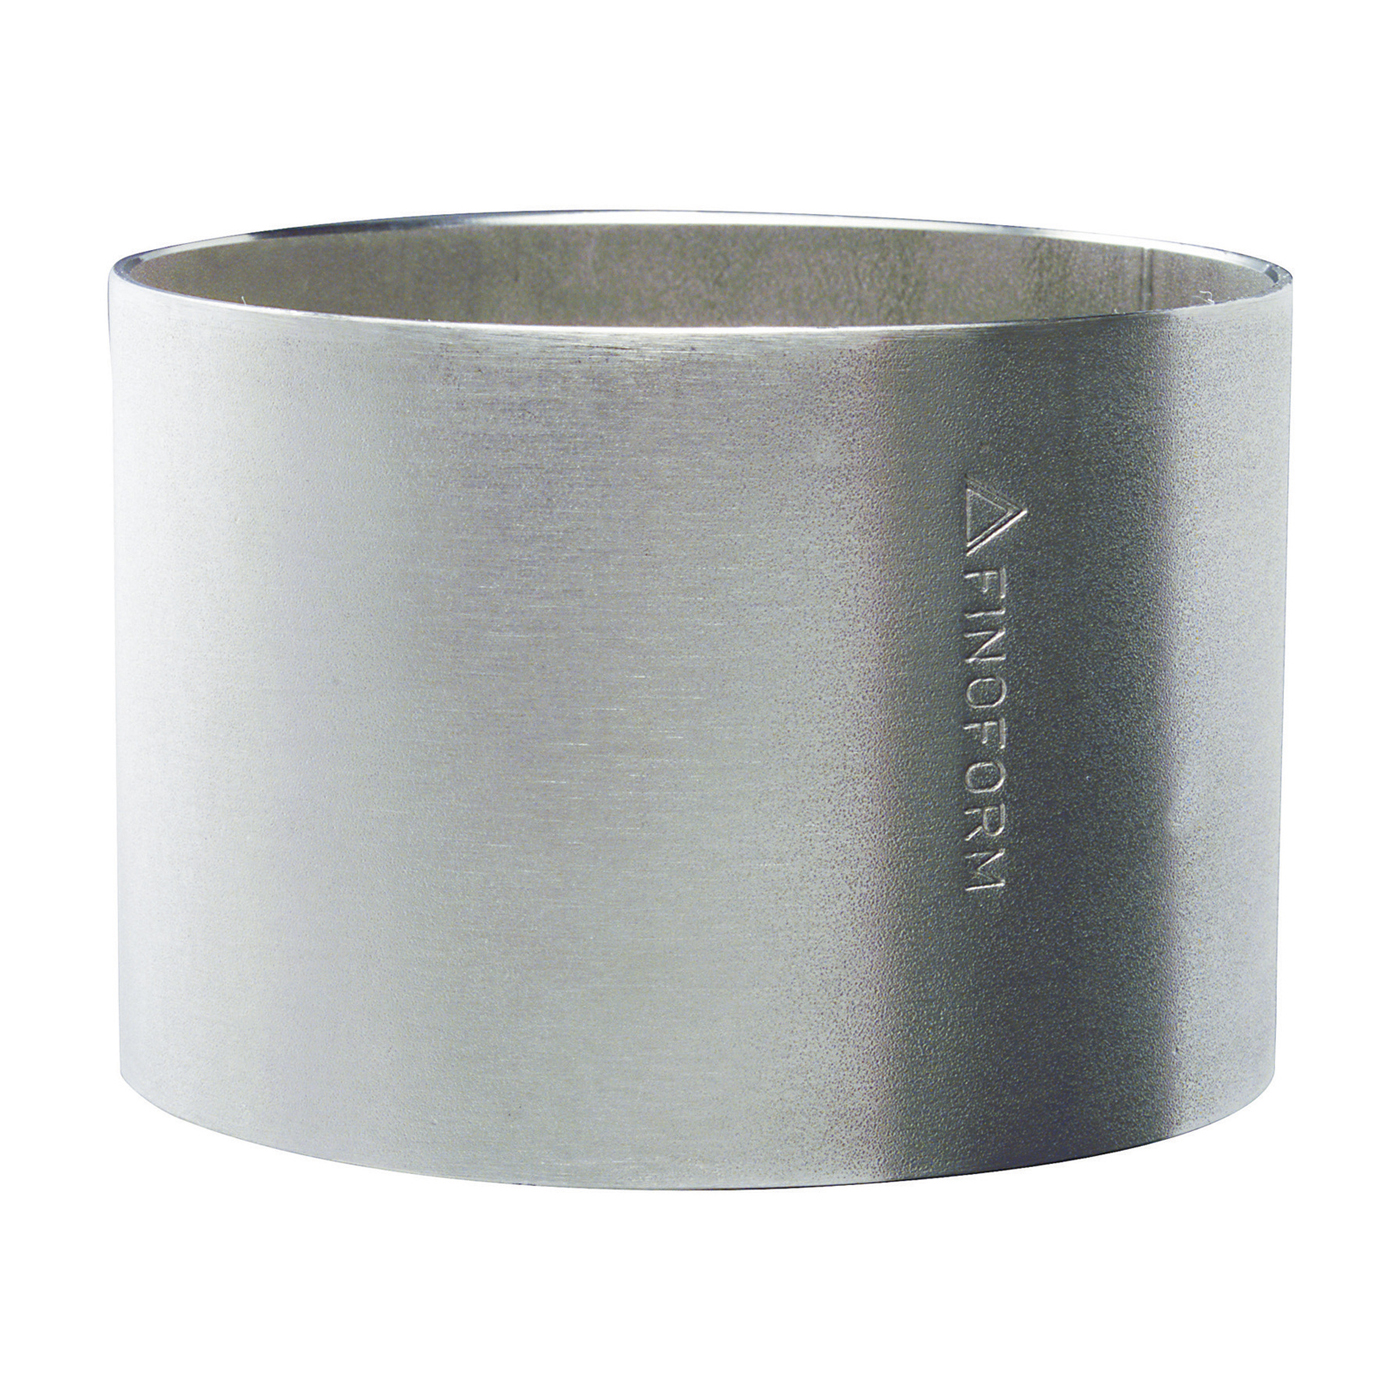 FINOFORM Mould Ring, Size 9x - 1 piece